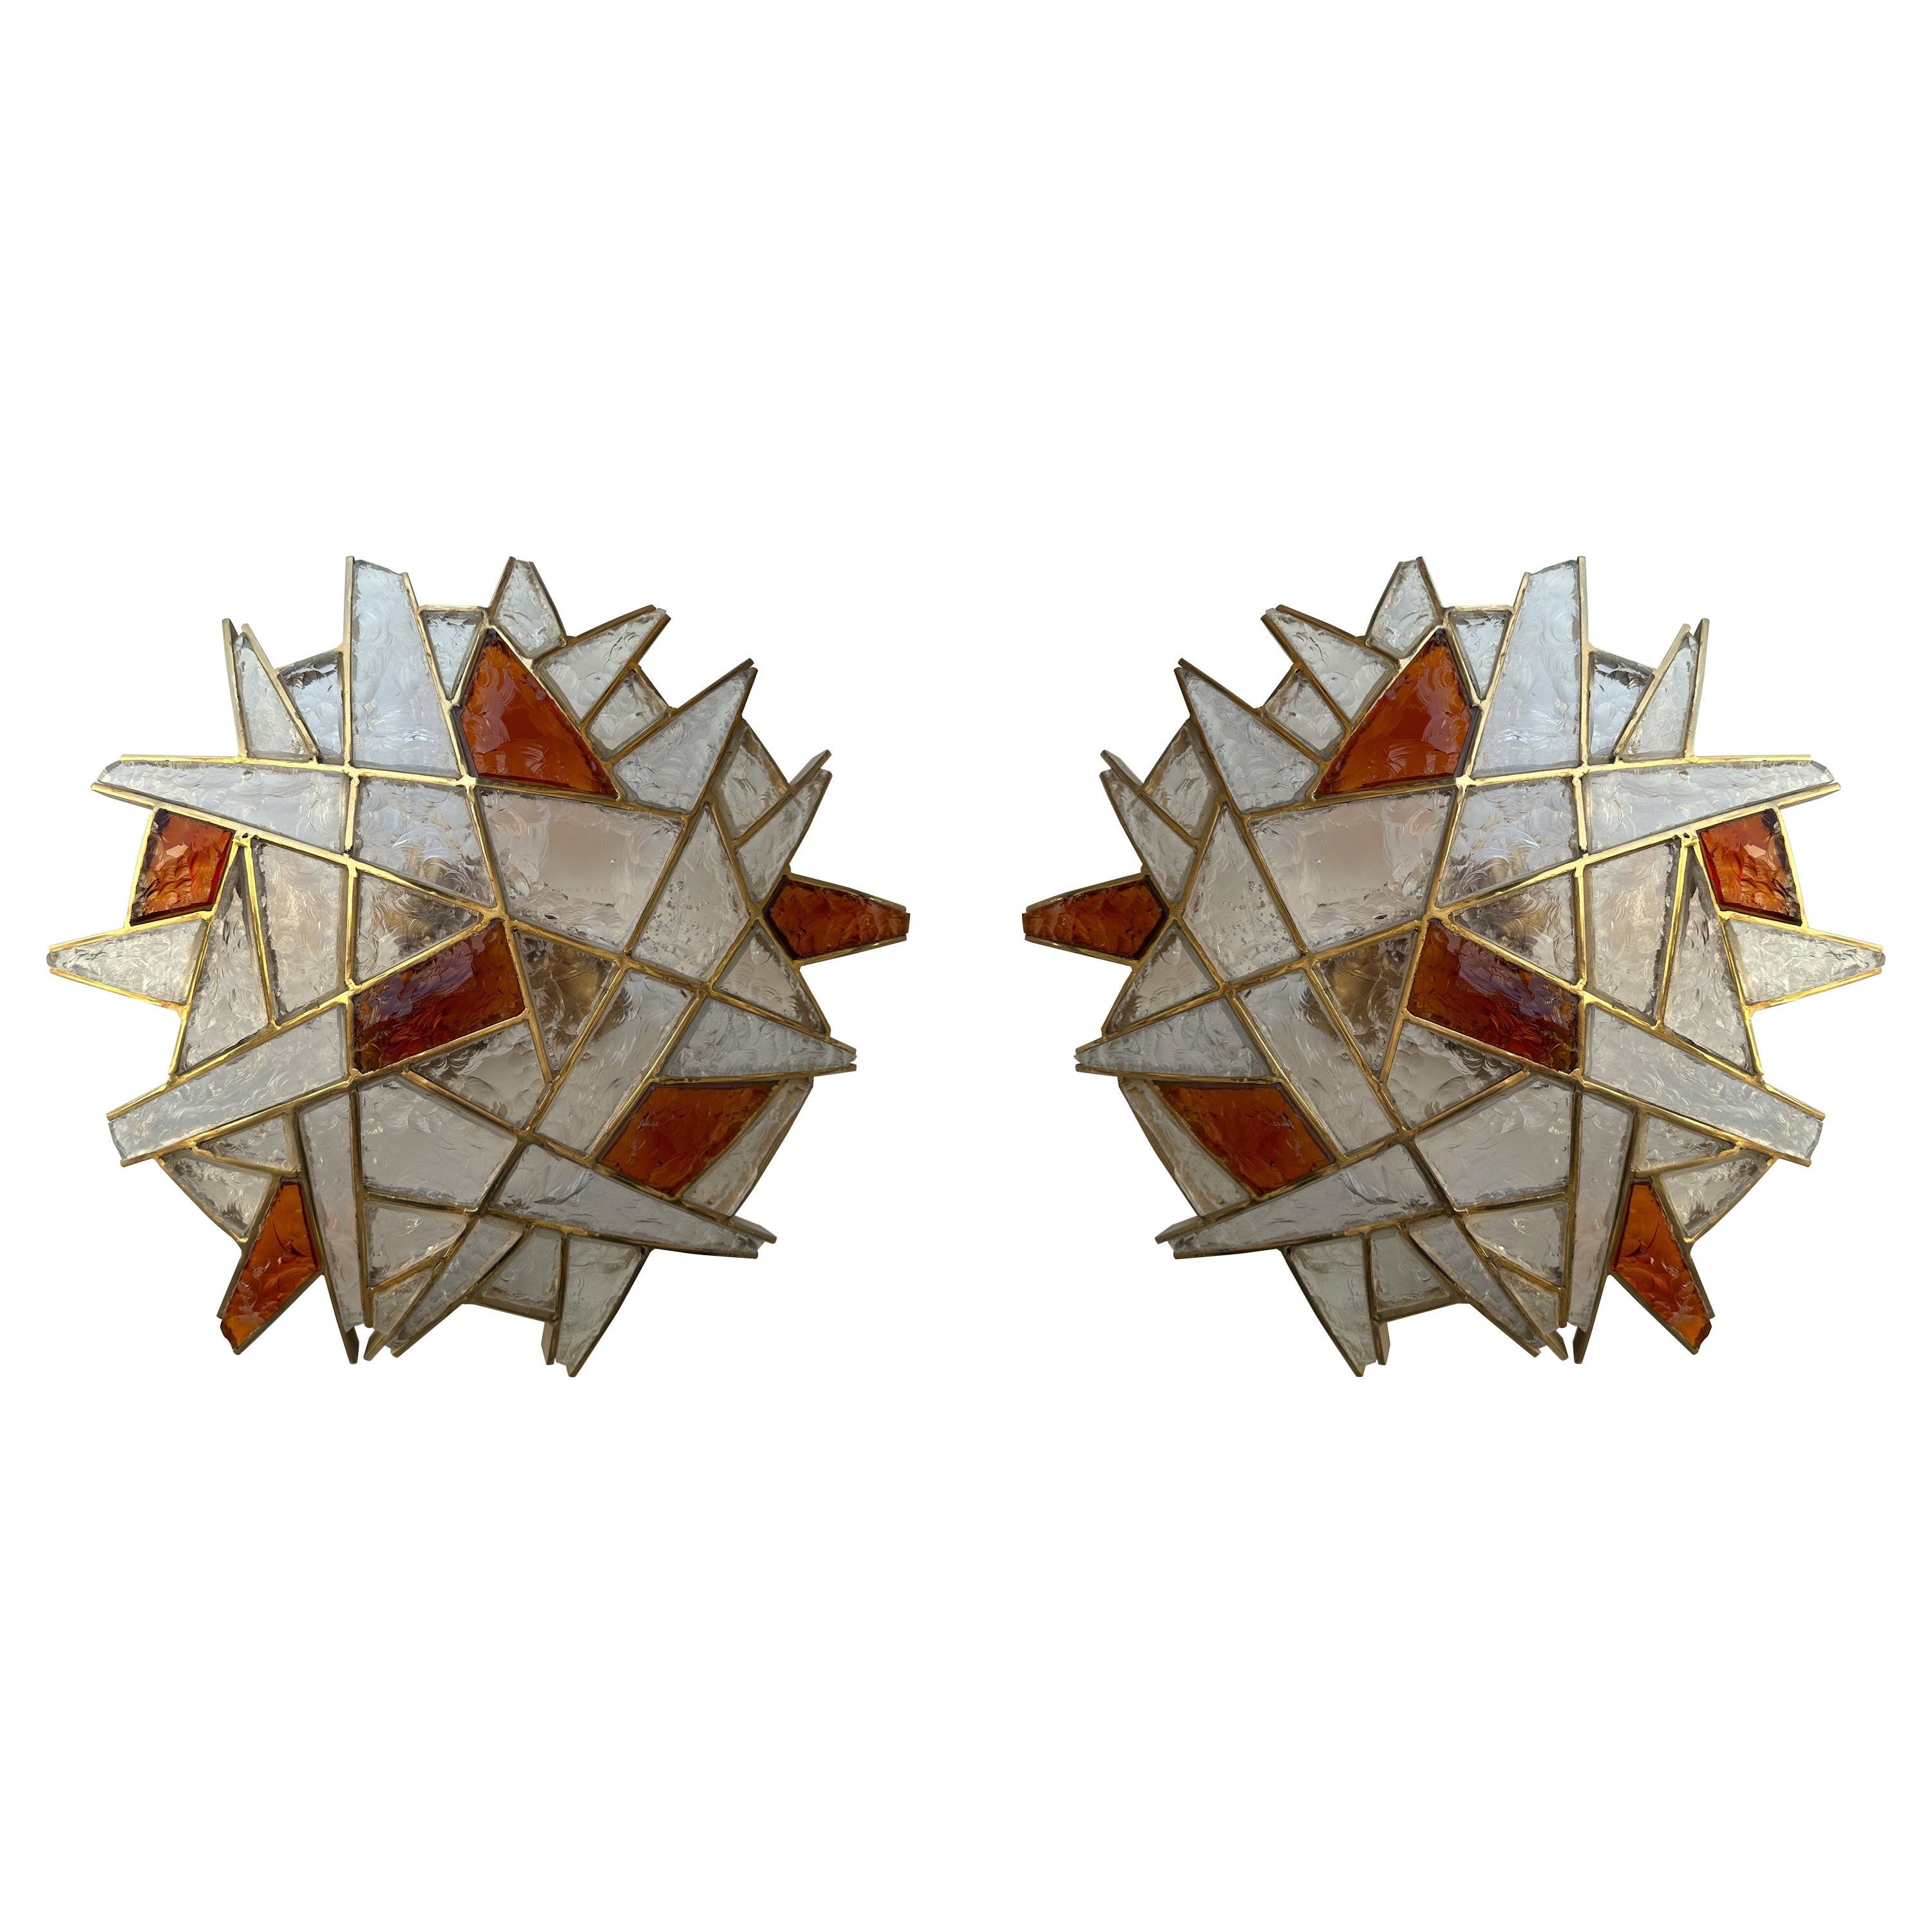 Large Pair of Hammered Glass Gilt Wrought Iron Sconces by Longobard, Italy 1970s For Sale